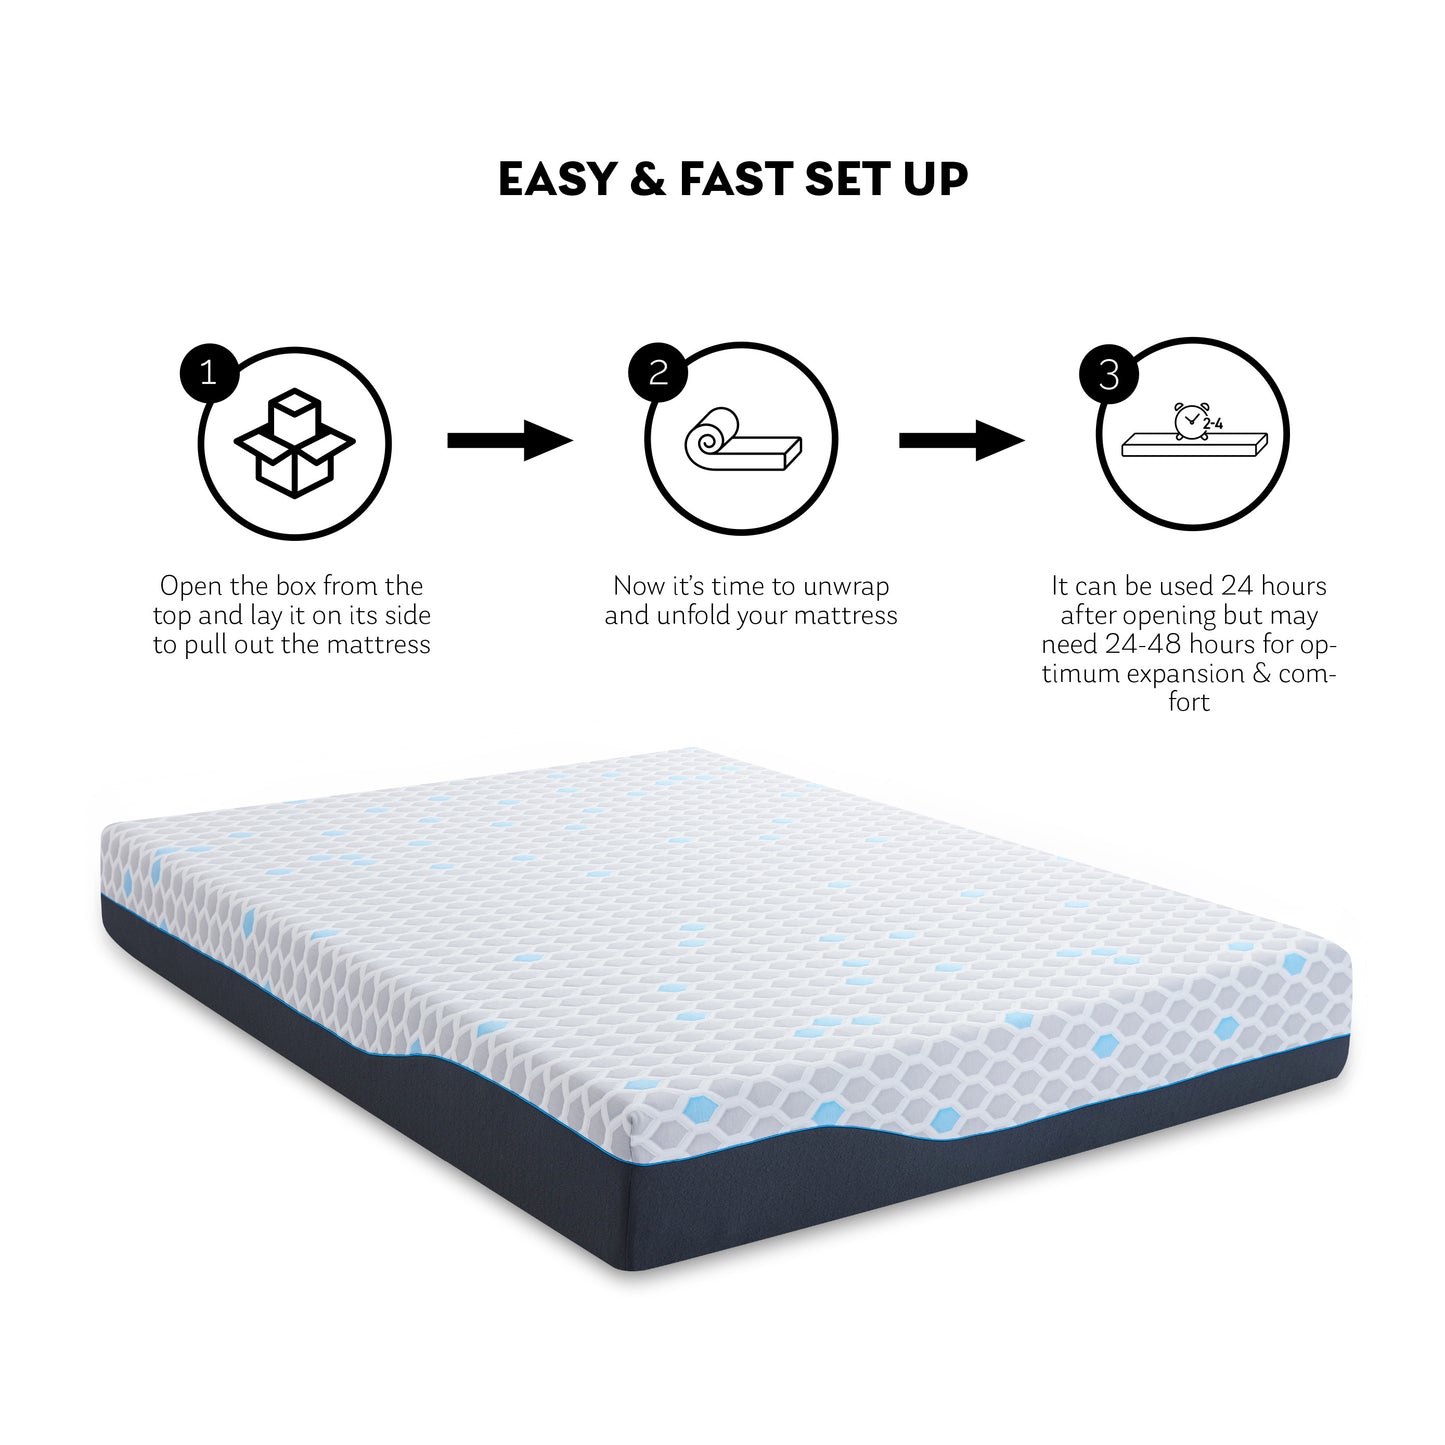 10 Inch Queen Size Memory Foam Mattress, Mattress in A Box, Gel Memory Foam Infused Bamboo Charcoal, CertiPUR-US Certified,Made in USA